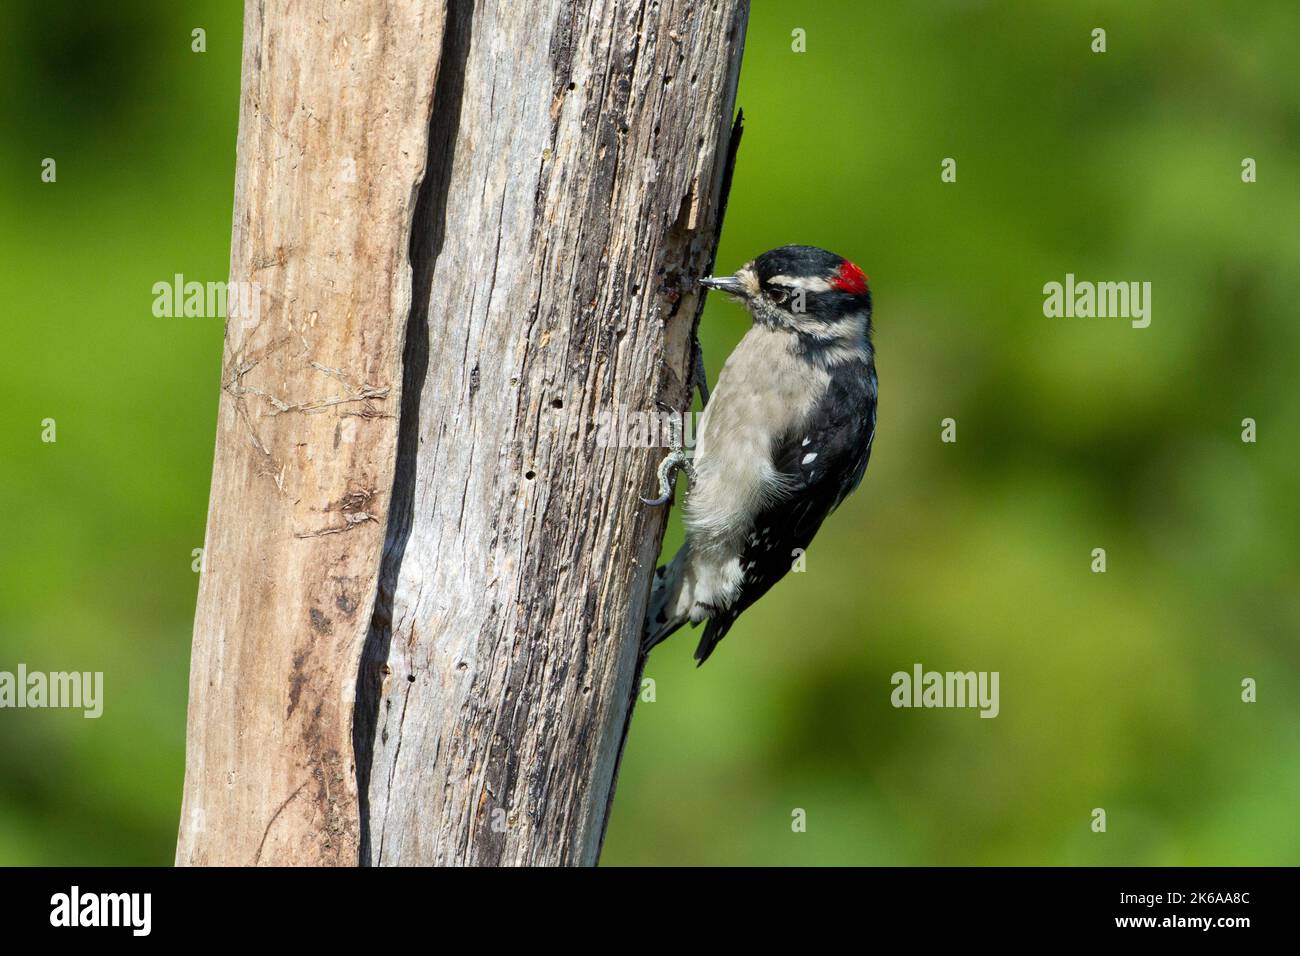 A male Downy woodpecker (Dryobates pubescens) feeding on suet at a dead tree stump in a garden in Nanaimo, British Columbia, Canada Stock Photo